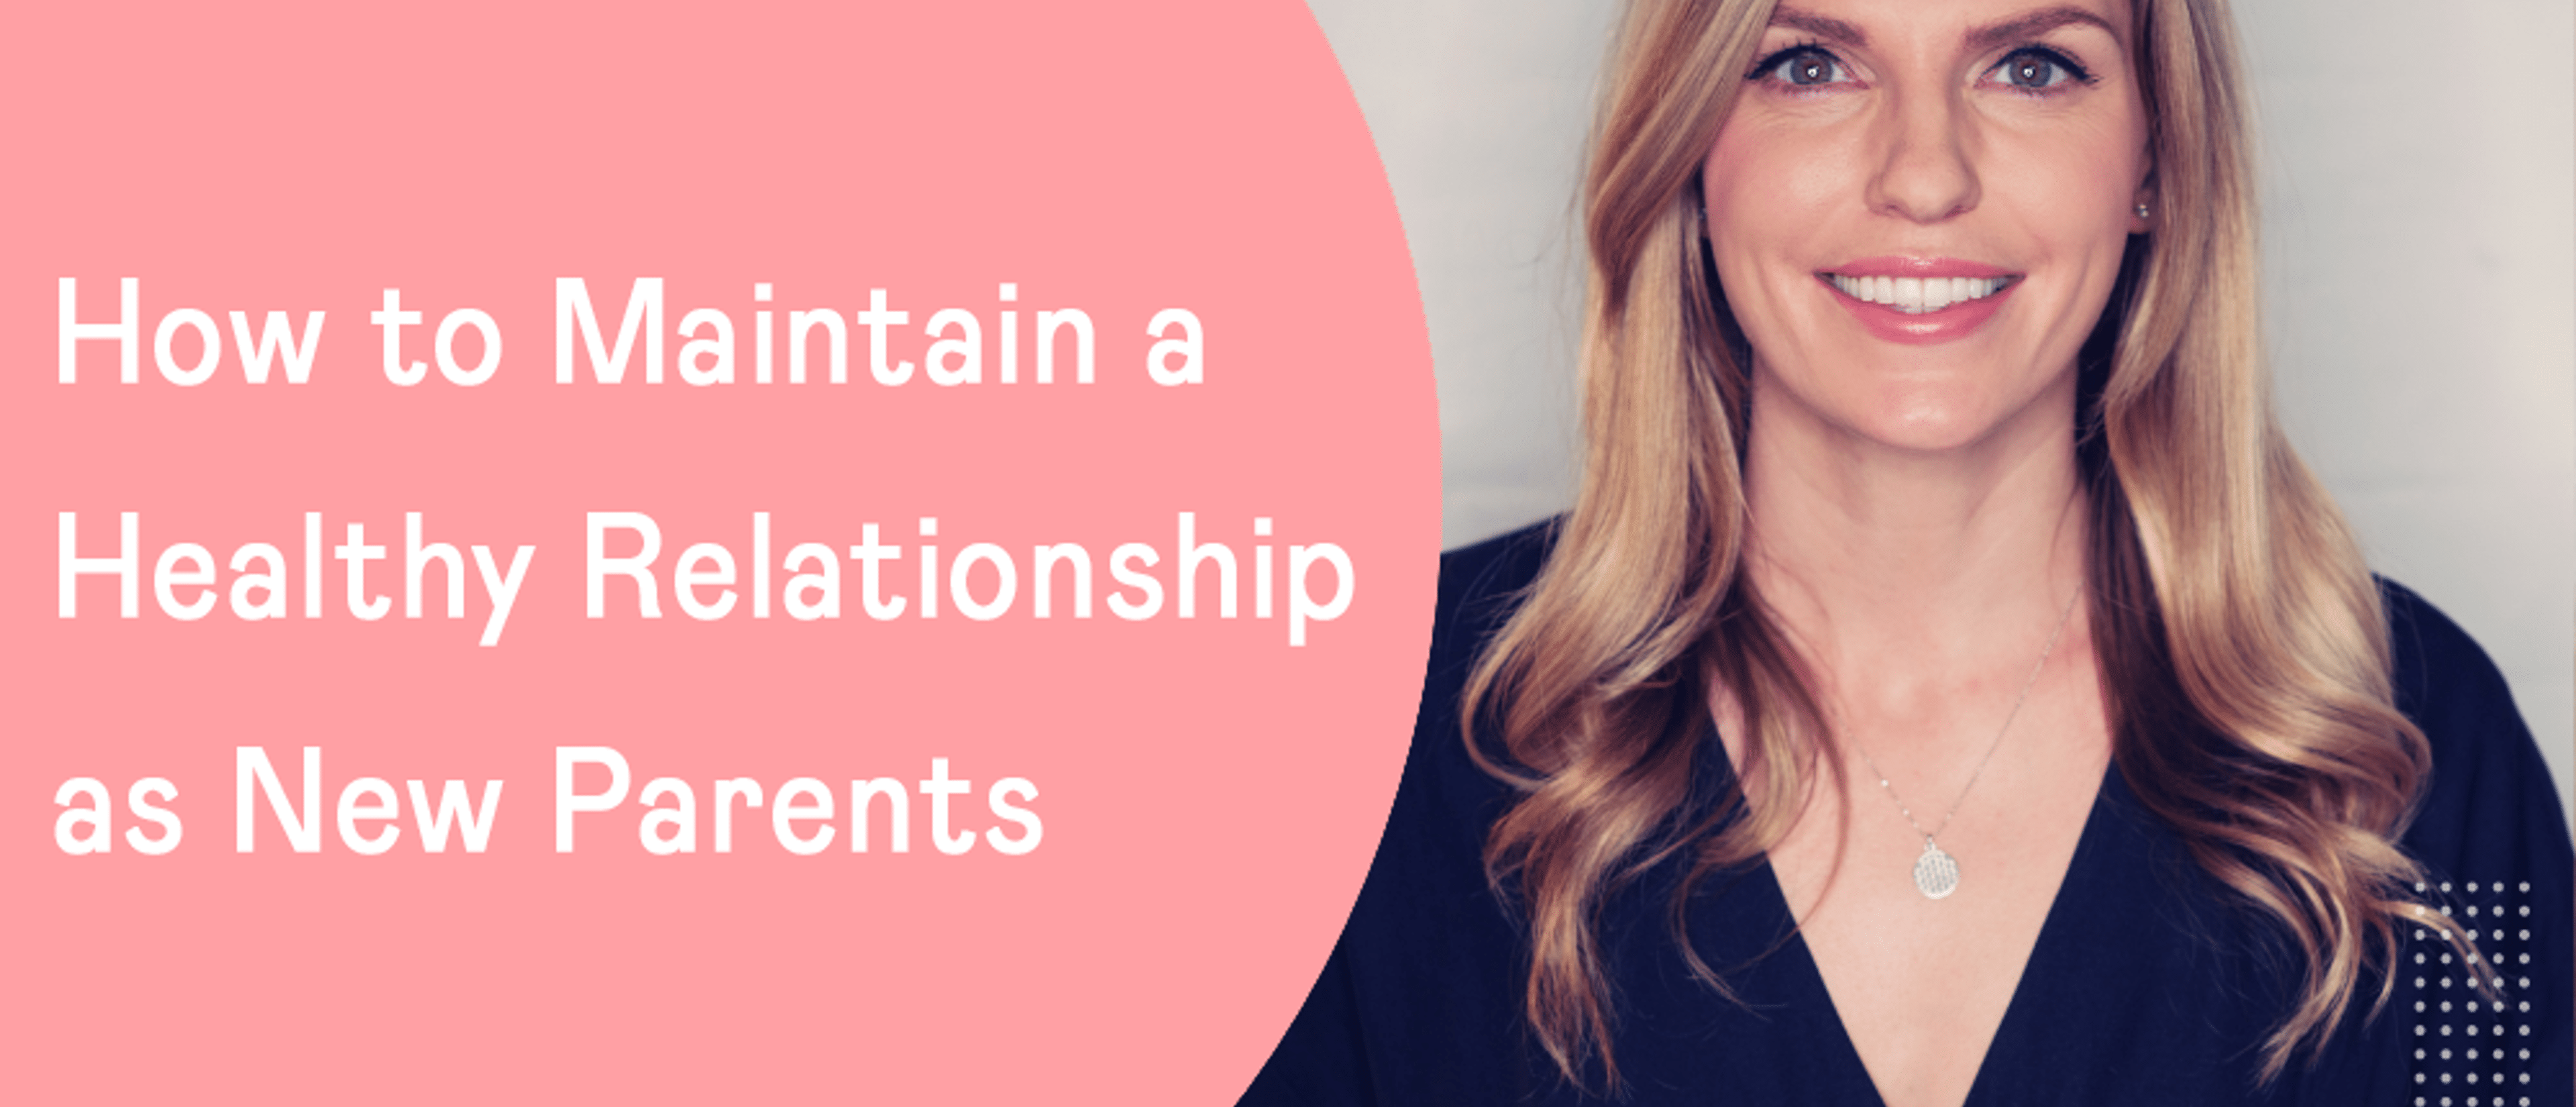 How to Maintain a Healthy Relationship as New Parents